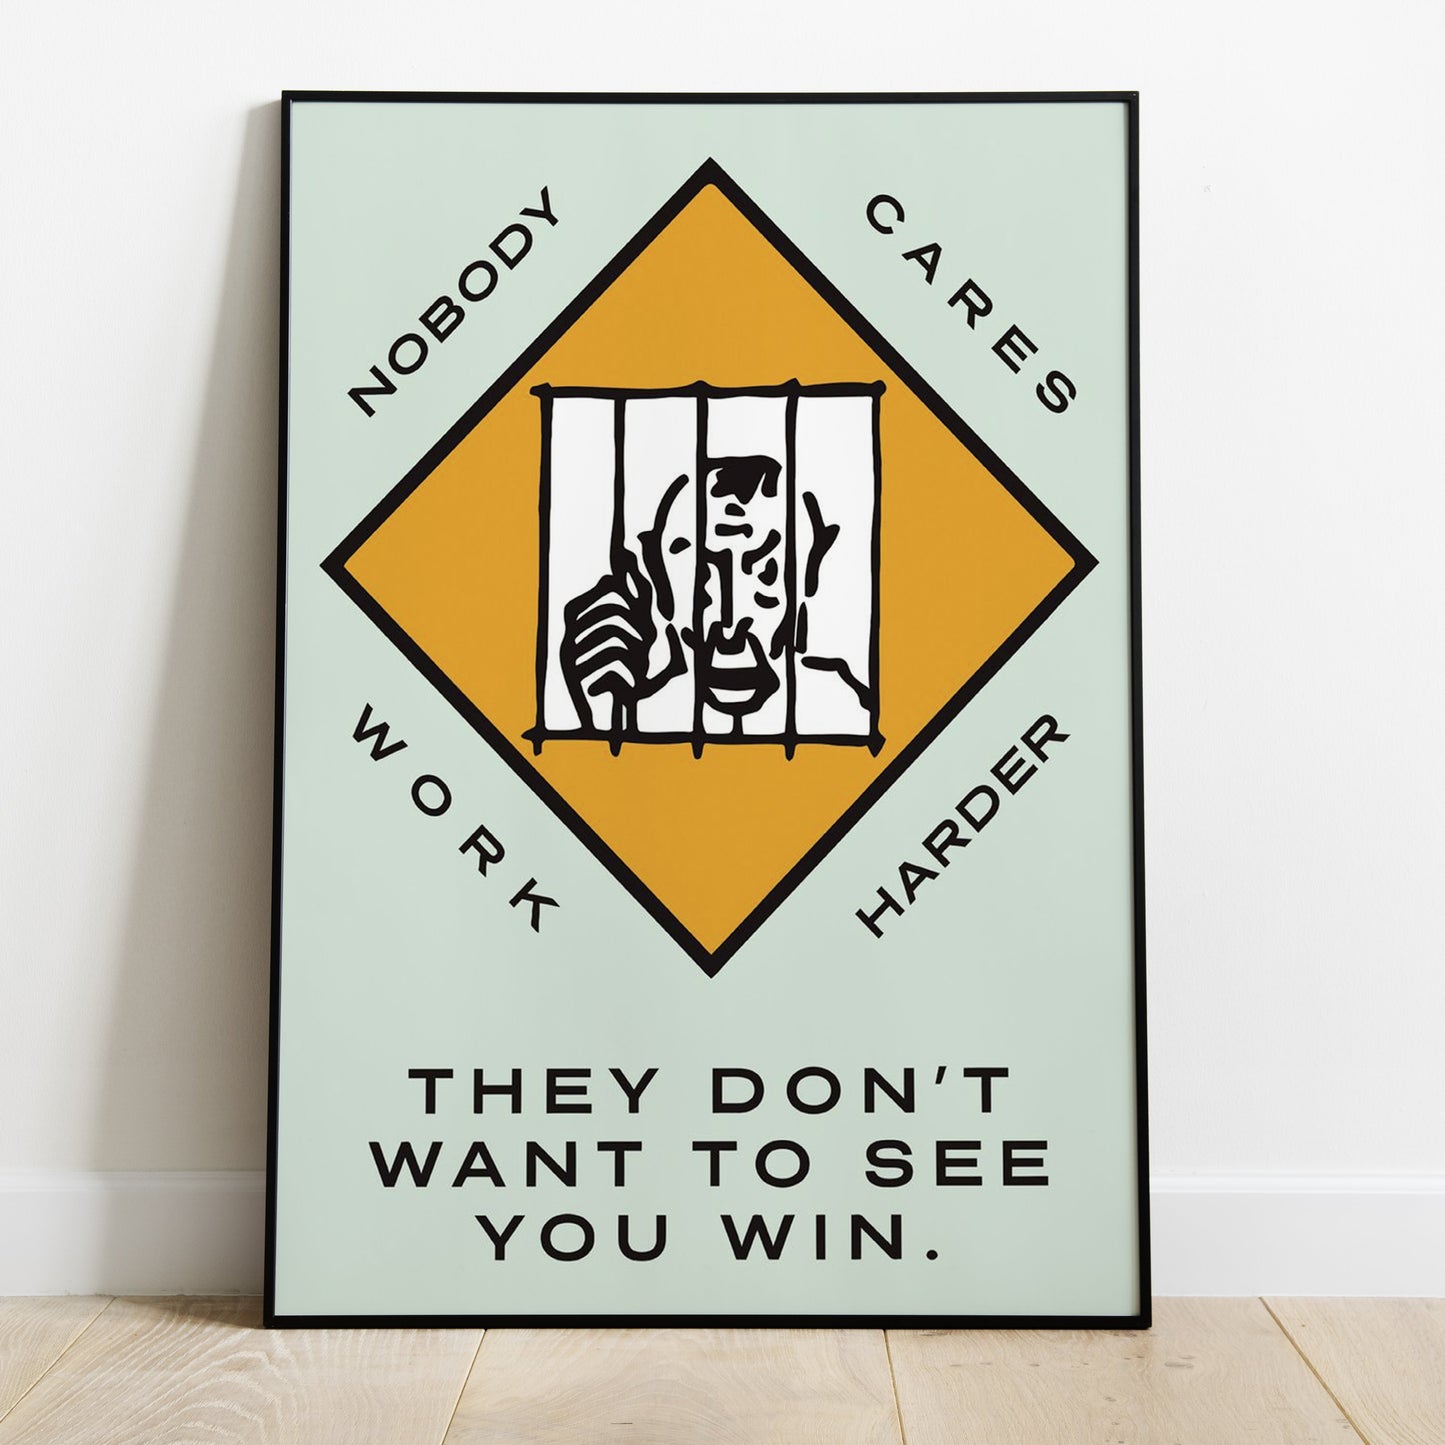 NOBODY CARES WORK HARDER Wall Art Poster for Home Office